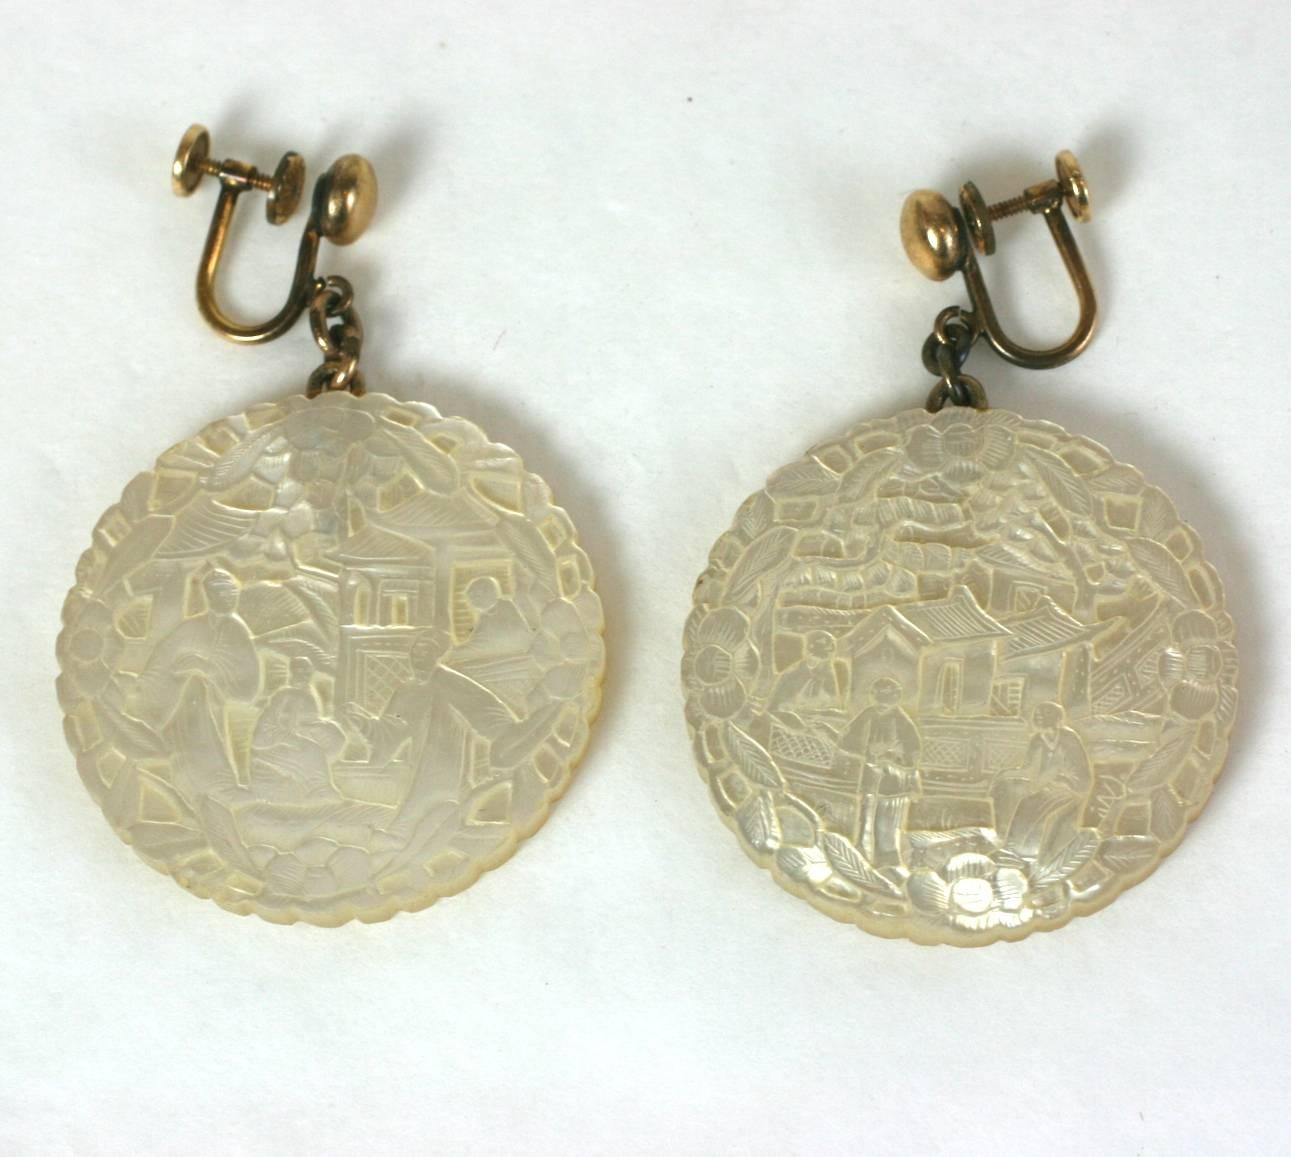 Mother of Pearl Chinese Earrings made from 19th Century antique gaming chips. Meticulously rendered scenic carvings with enameled "S" on the back of each chip. 
Chips are mounted onto gold filled screw back earring tops, at a later date .